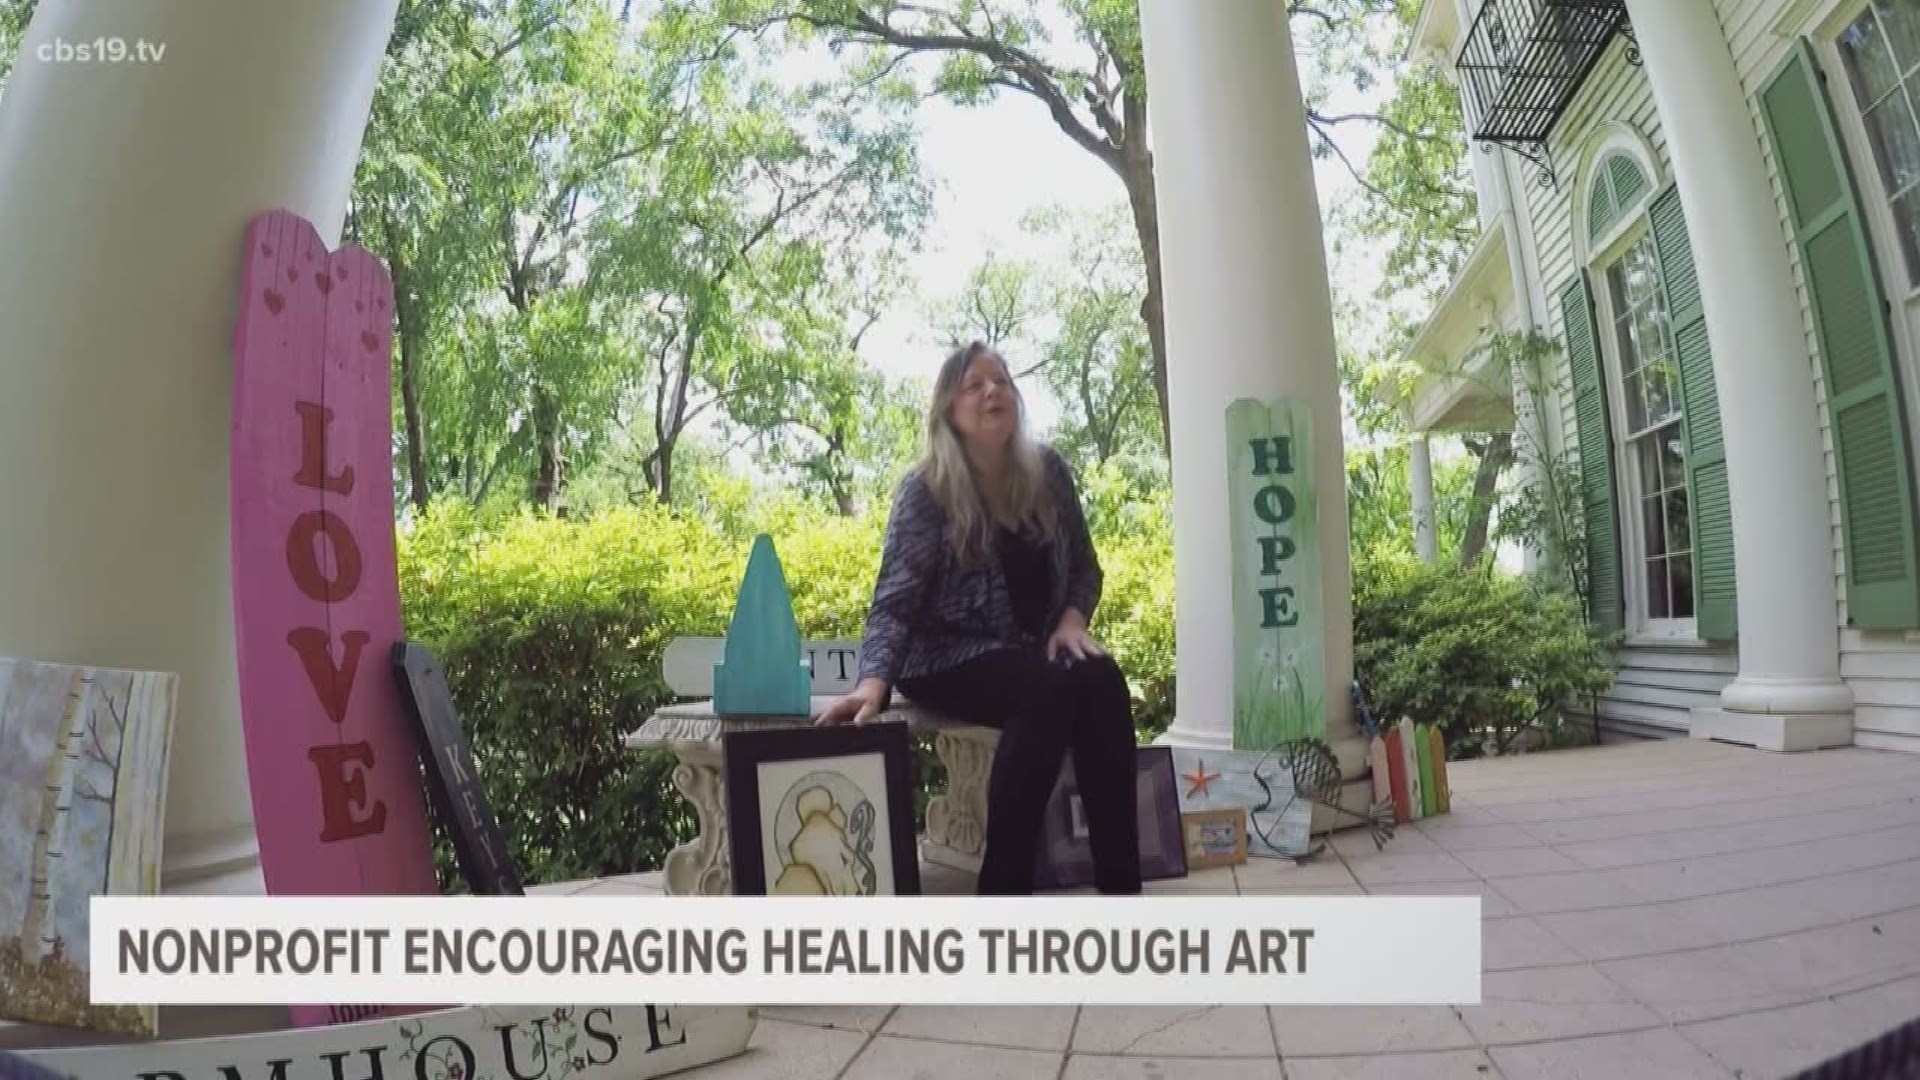 Hearts Found is a new nonprofit in East Texas, encouraging healing through the arts.